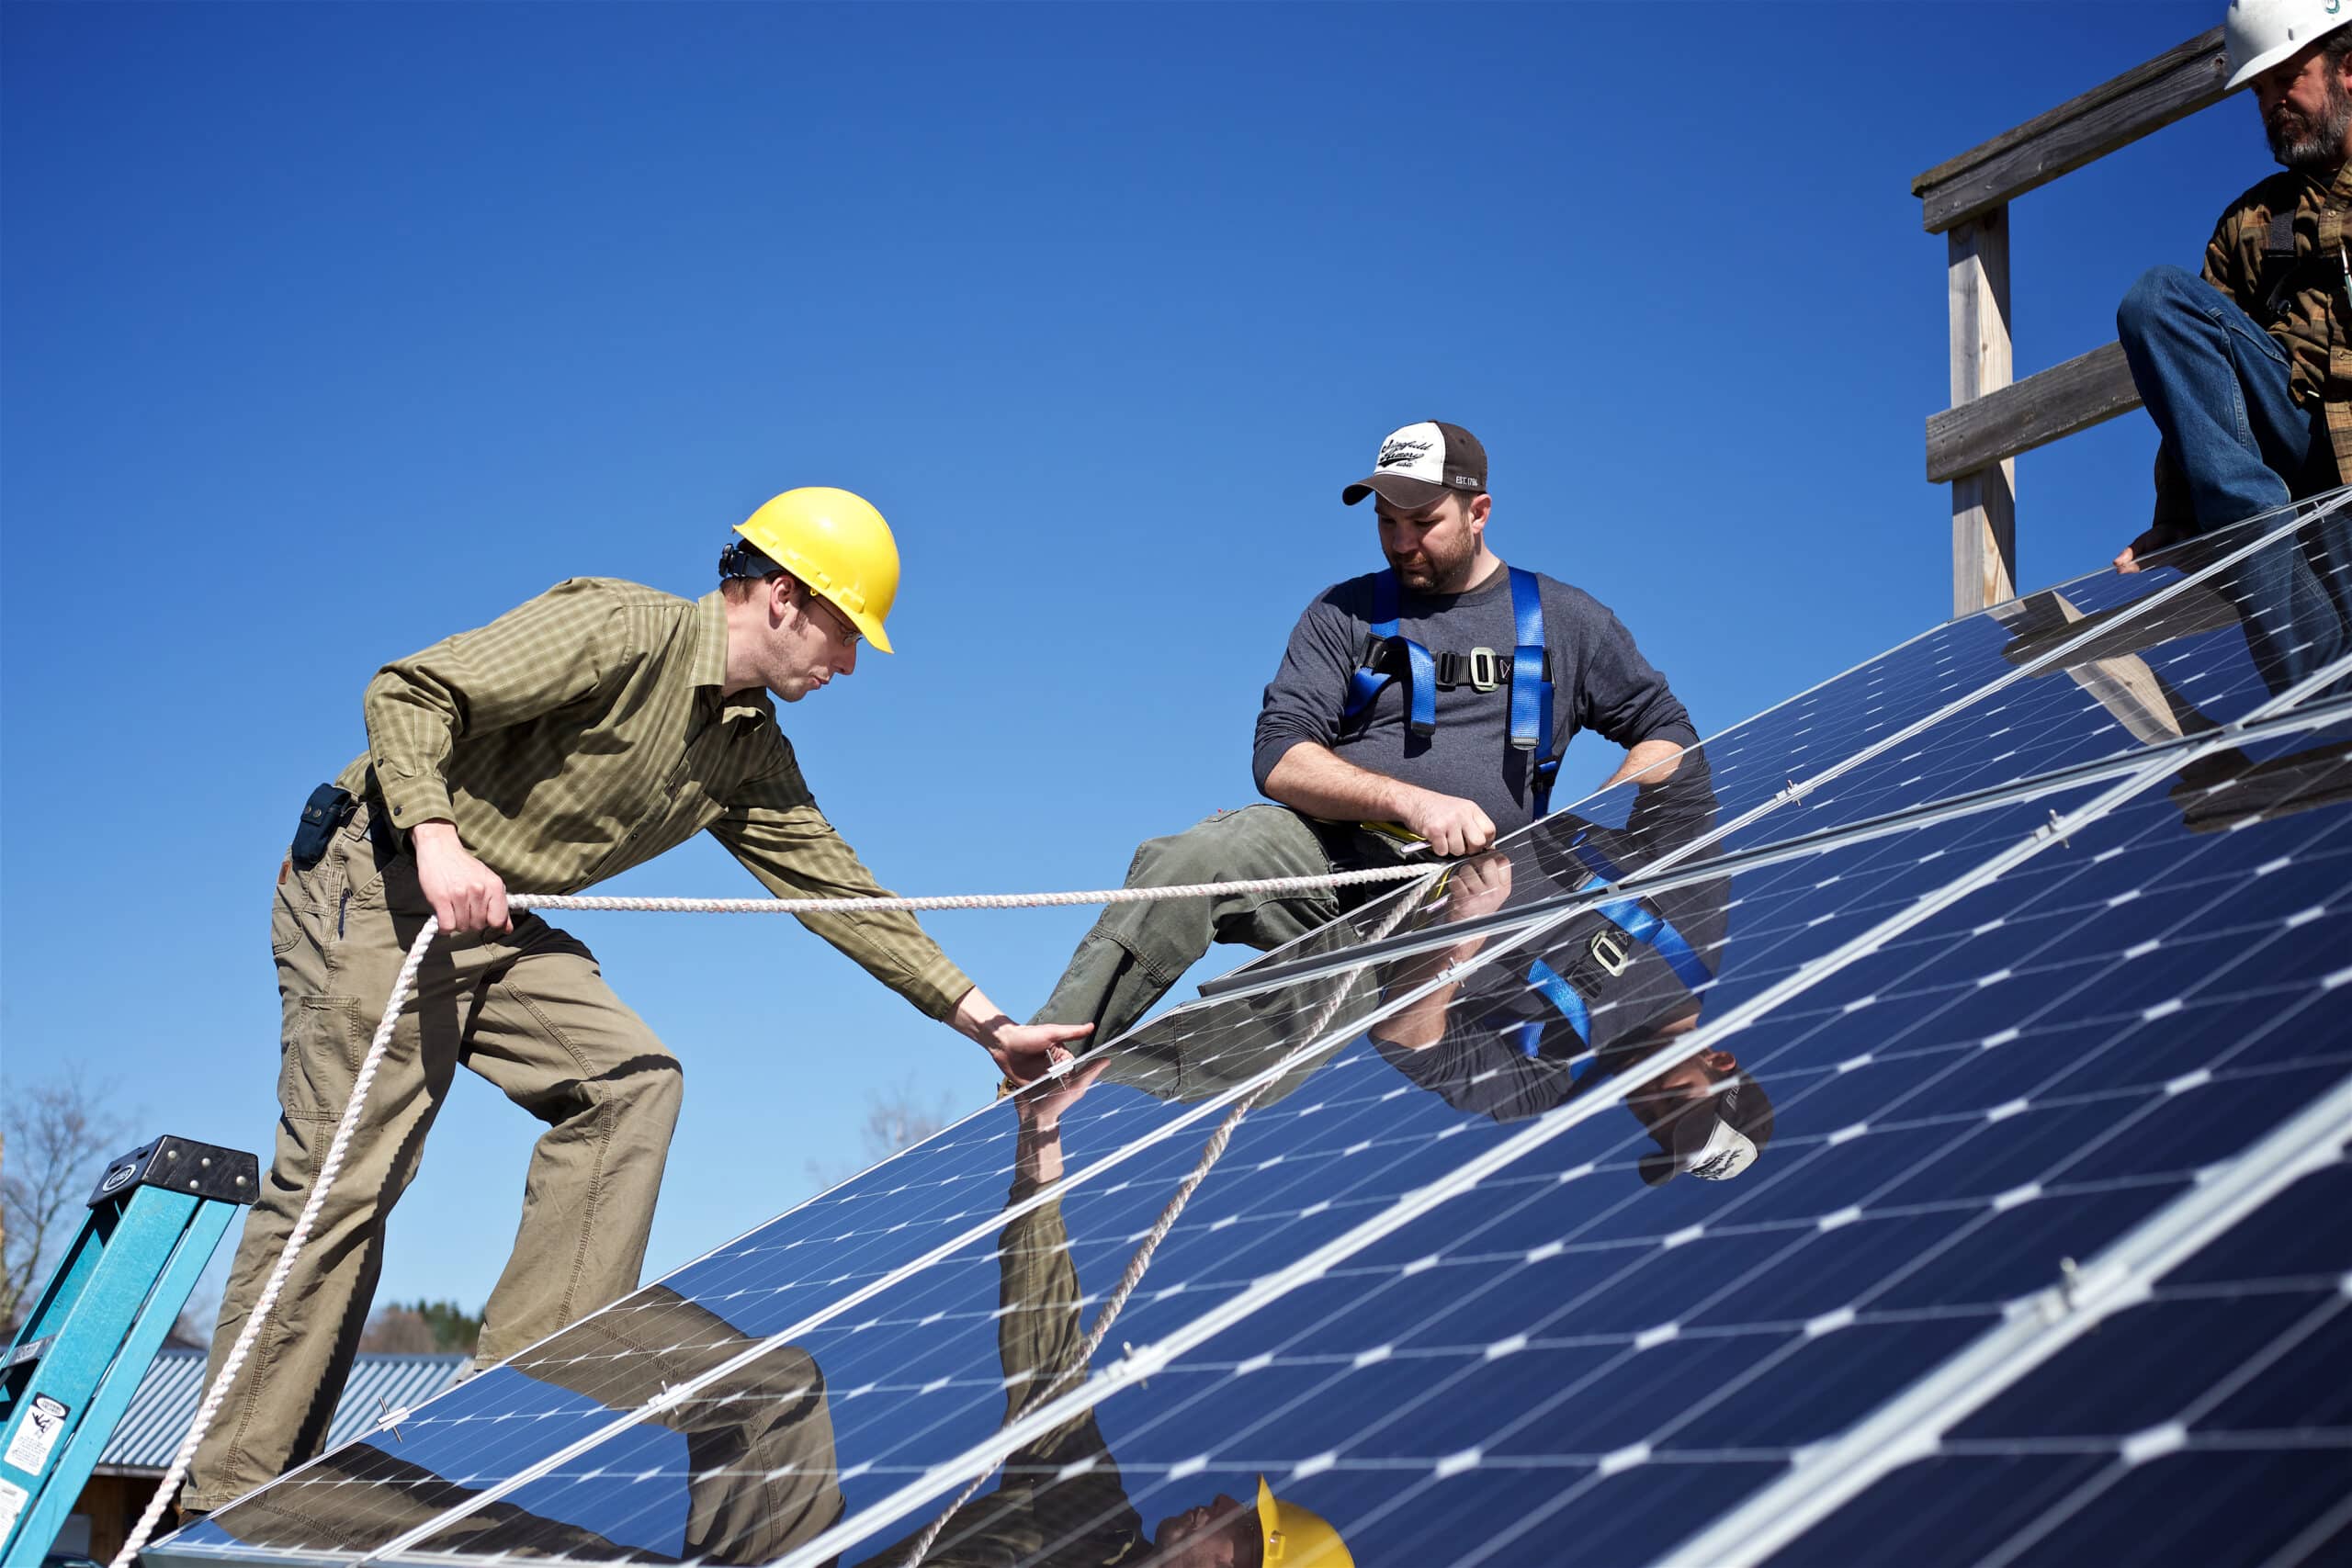 Two men stand on the side of a roof installing solar panels as part of the Vermont State University Renewable Energy program.